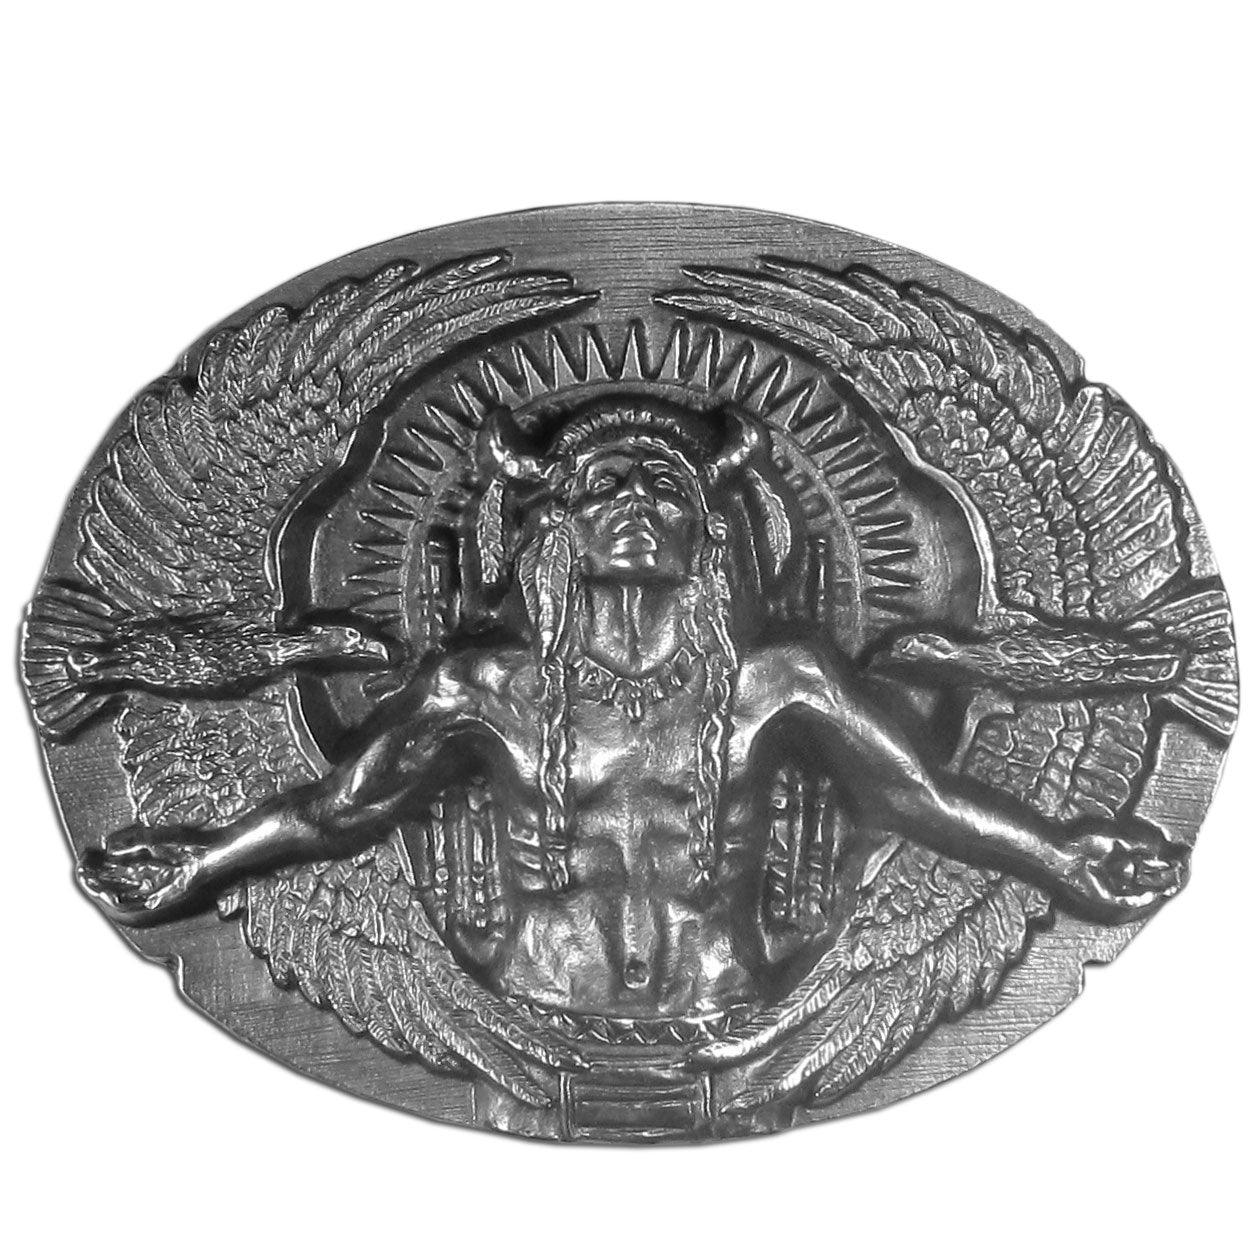 Indian and Eagles Antiqued Buckle - Flyclothing LLC